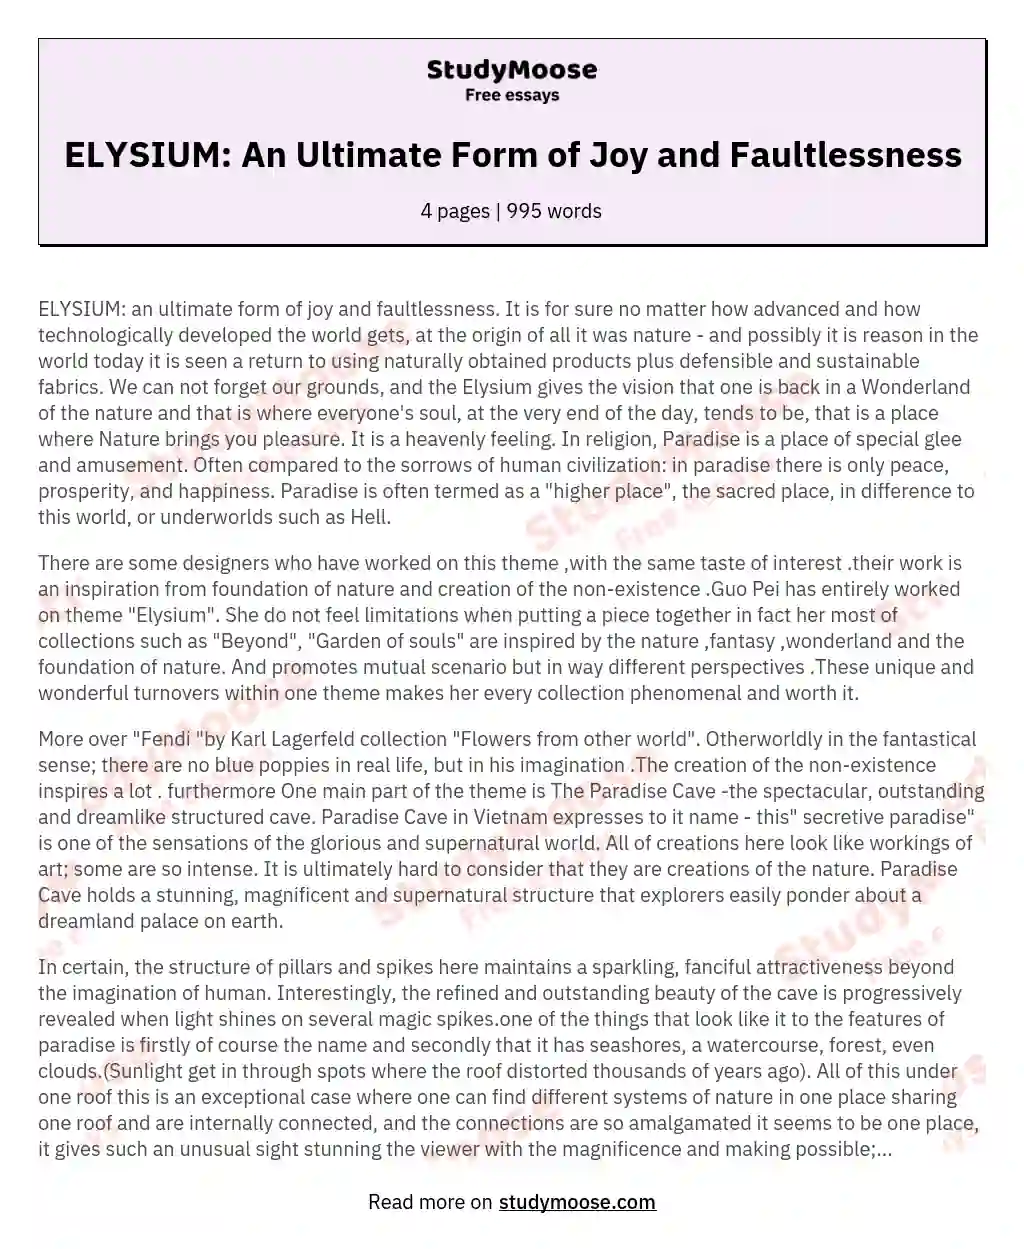 ELYSIUM: An Ultimate Form of Joy and Faultlessness essay